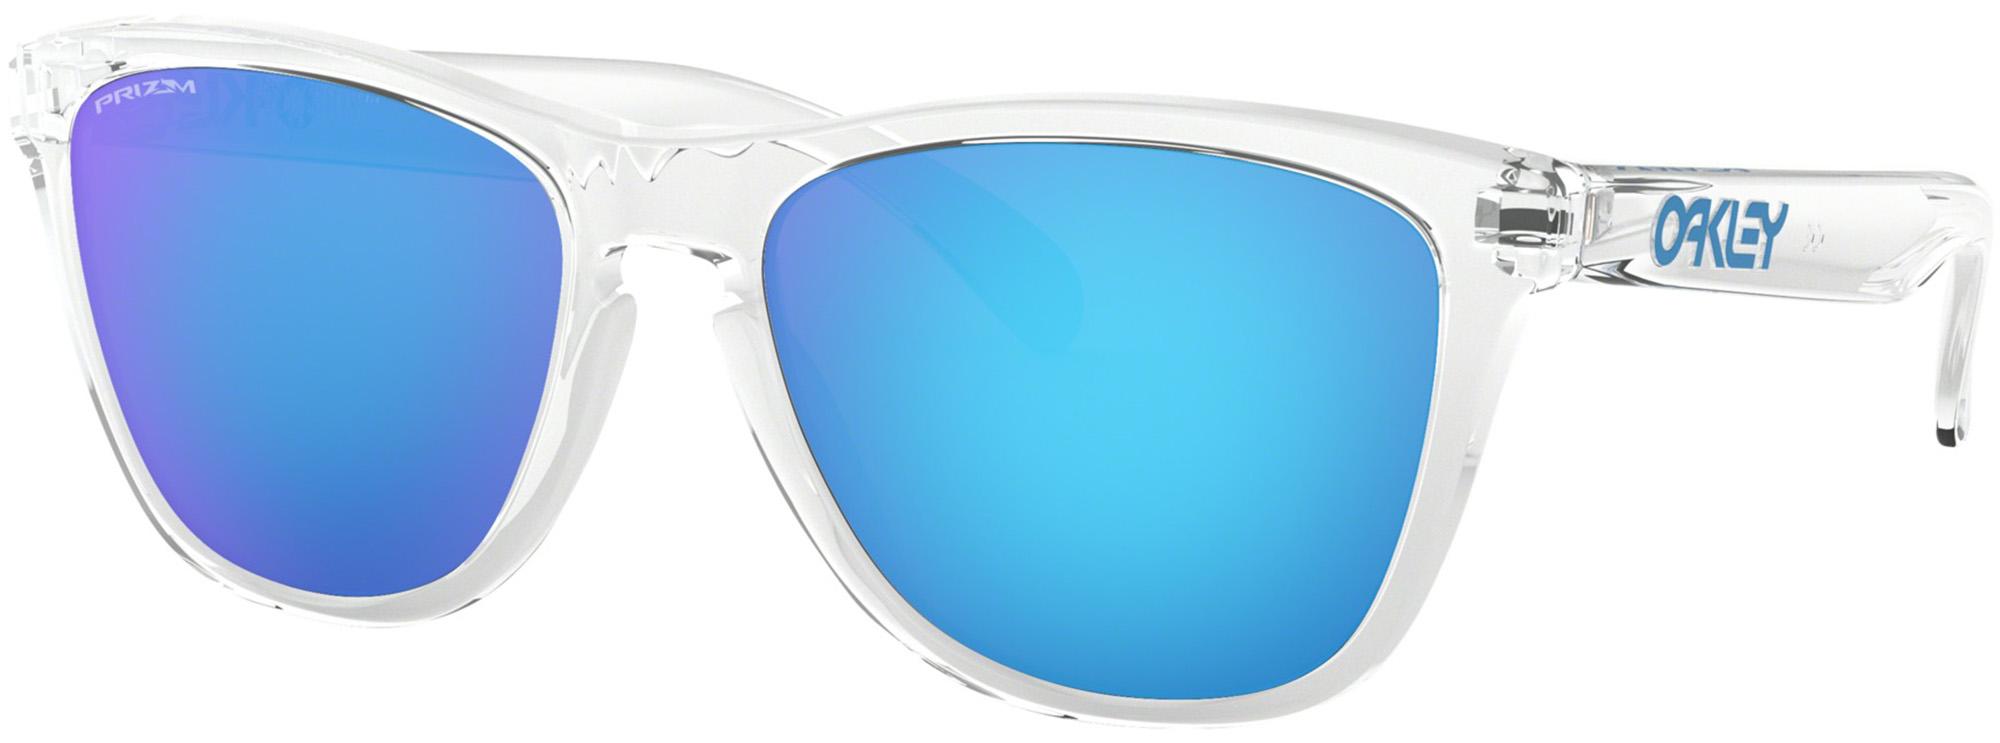 Oakley Frogskins Prizm Sapphire Sunglasses - Crystal Clear